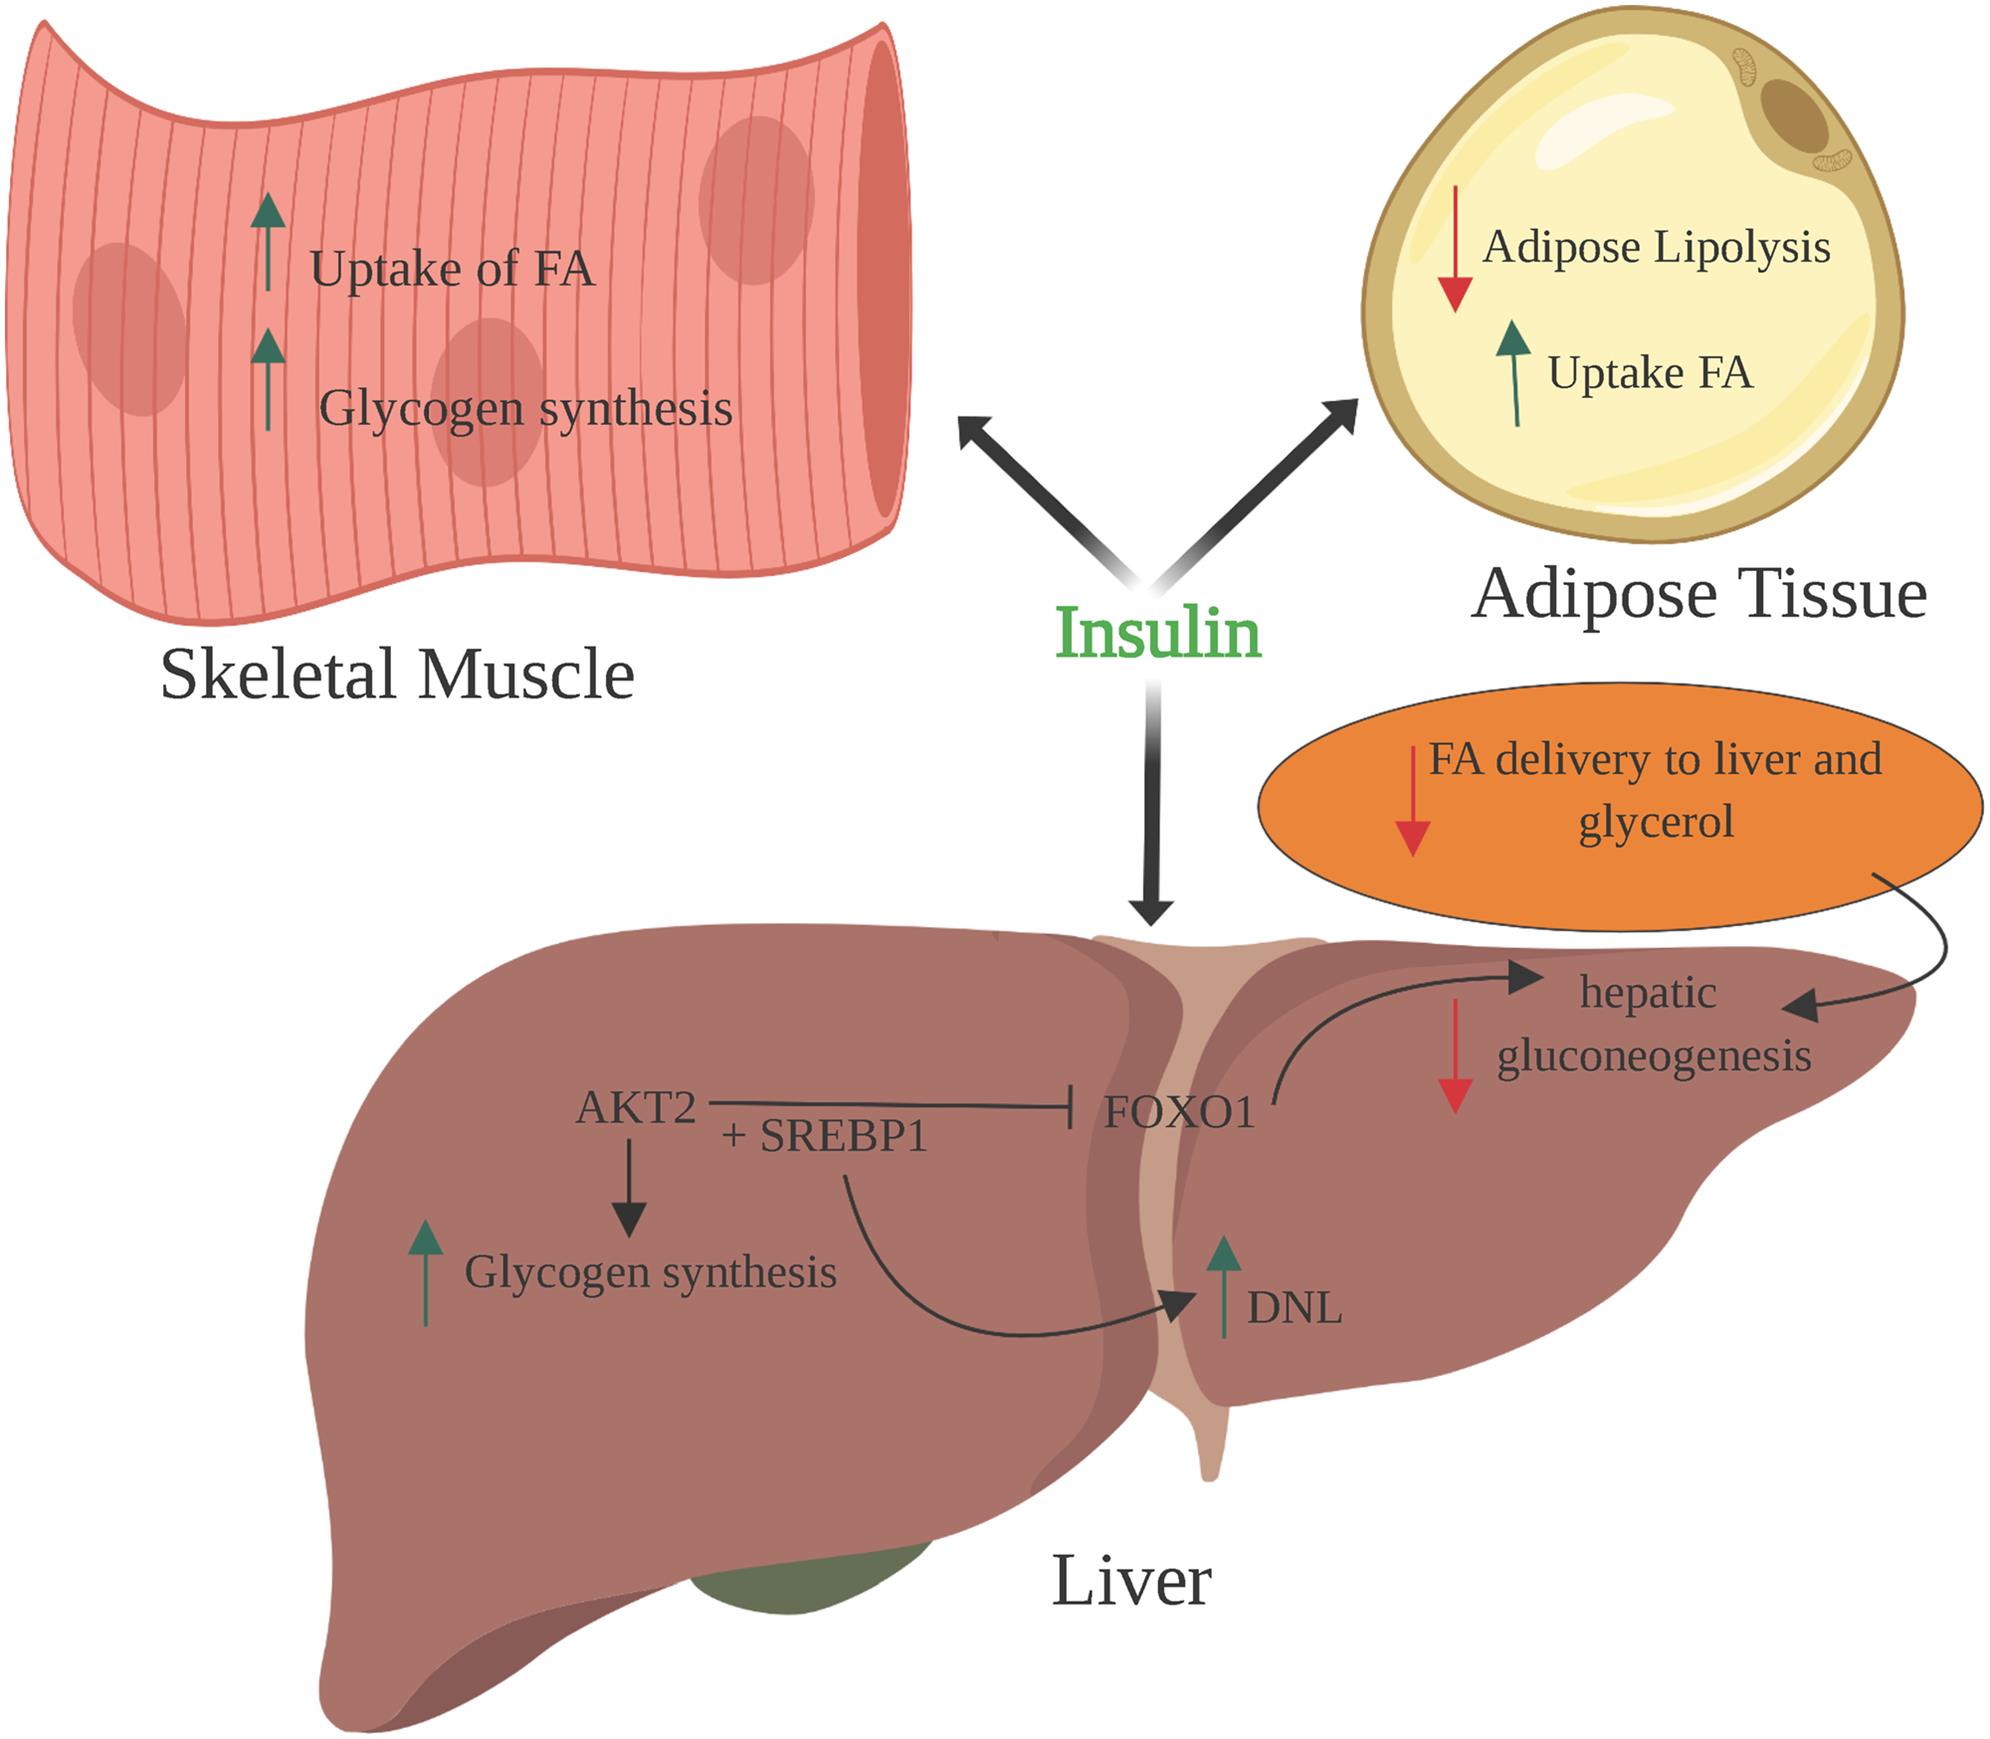 Effects of Insulin on Glucose and Lipid metabolism.